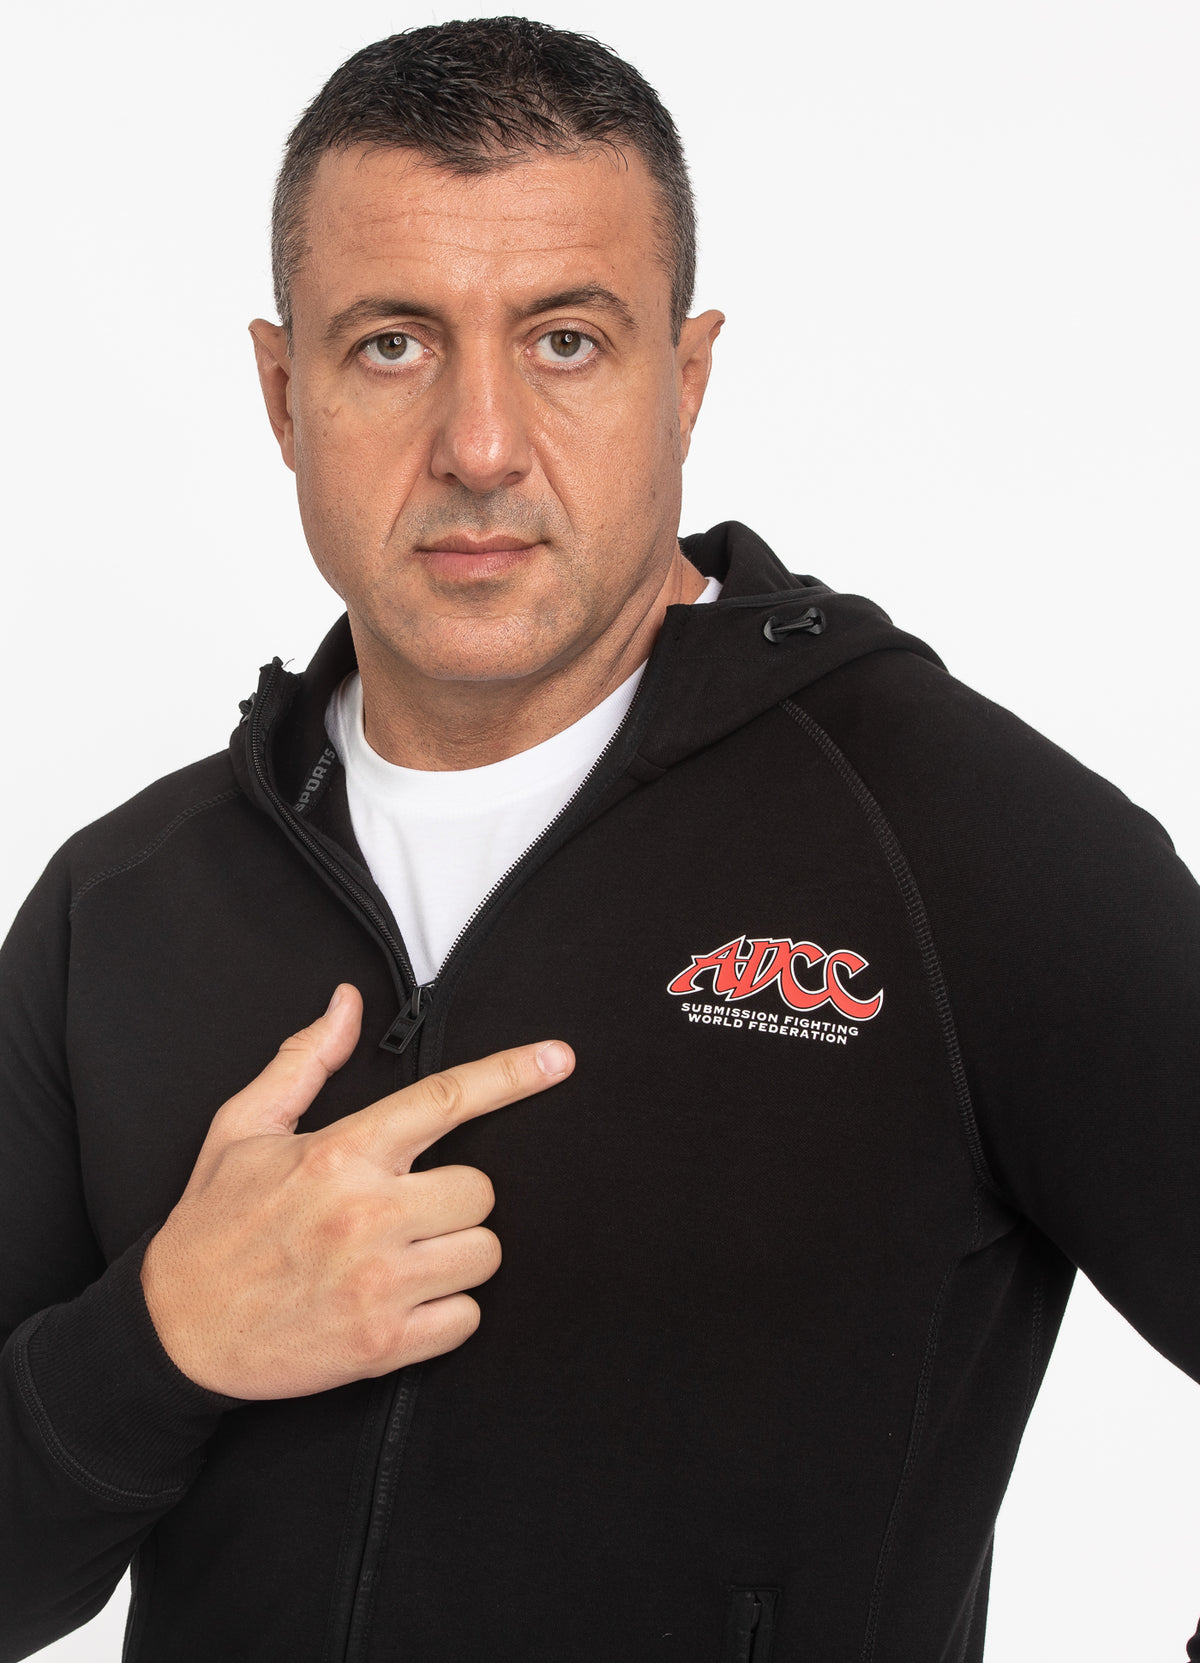 ADCC Black Hooded Zip